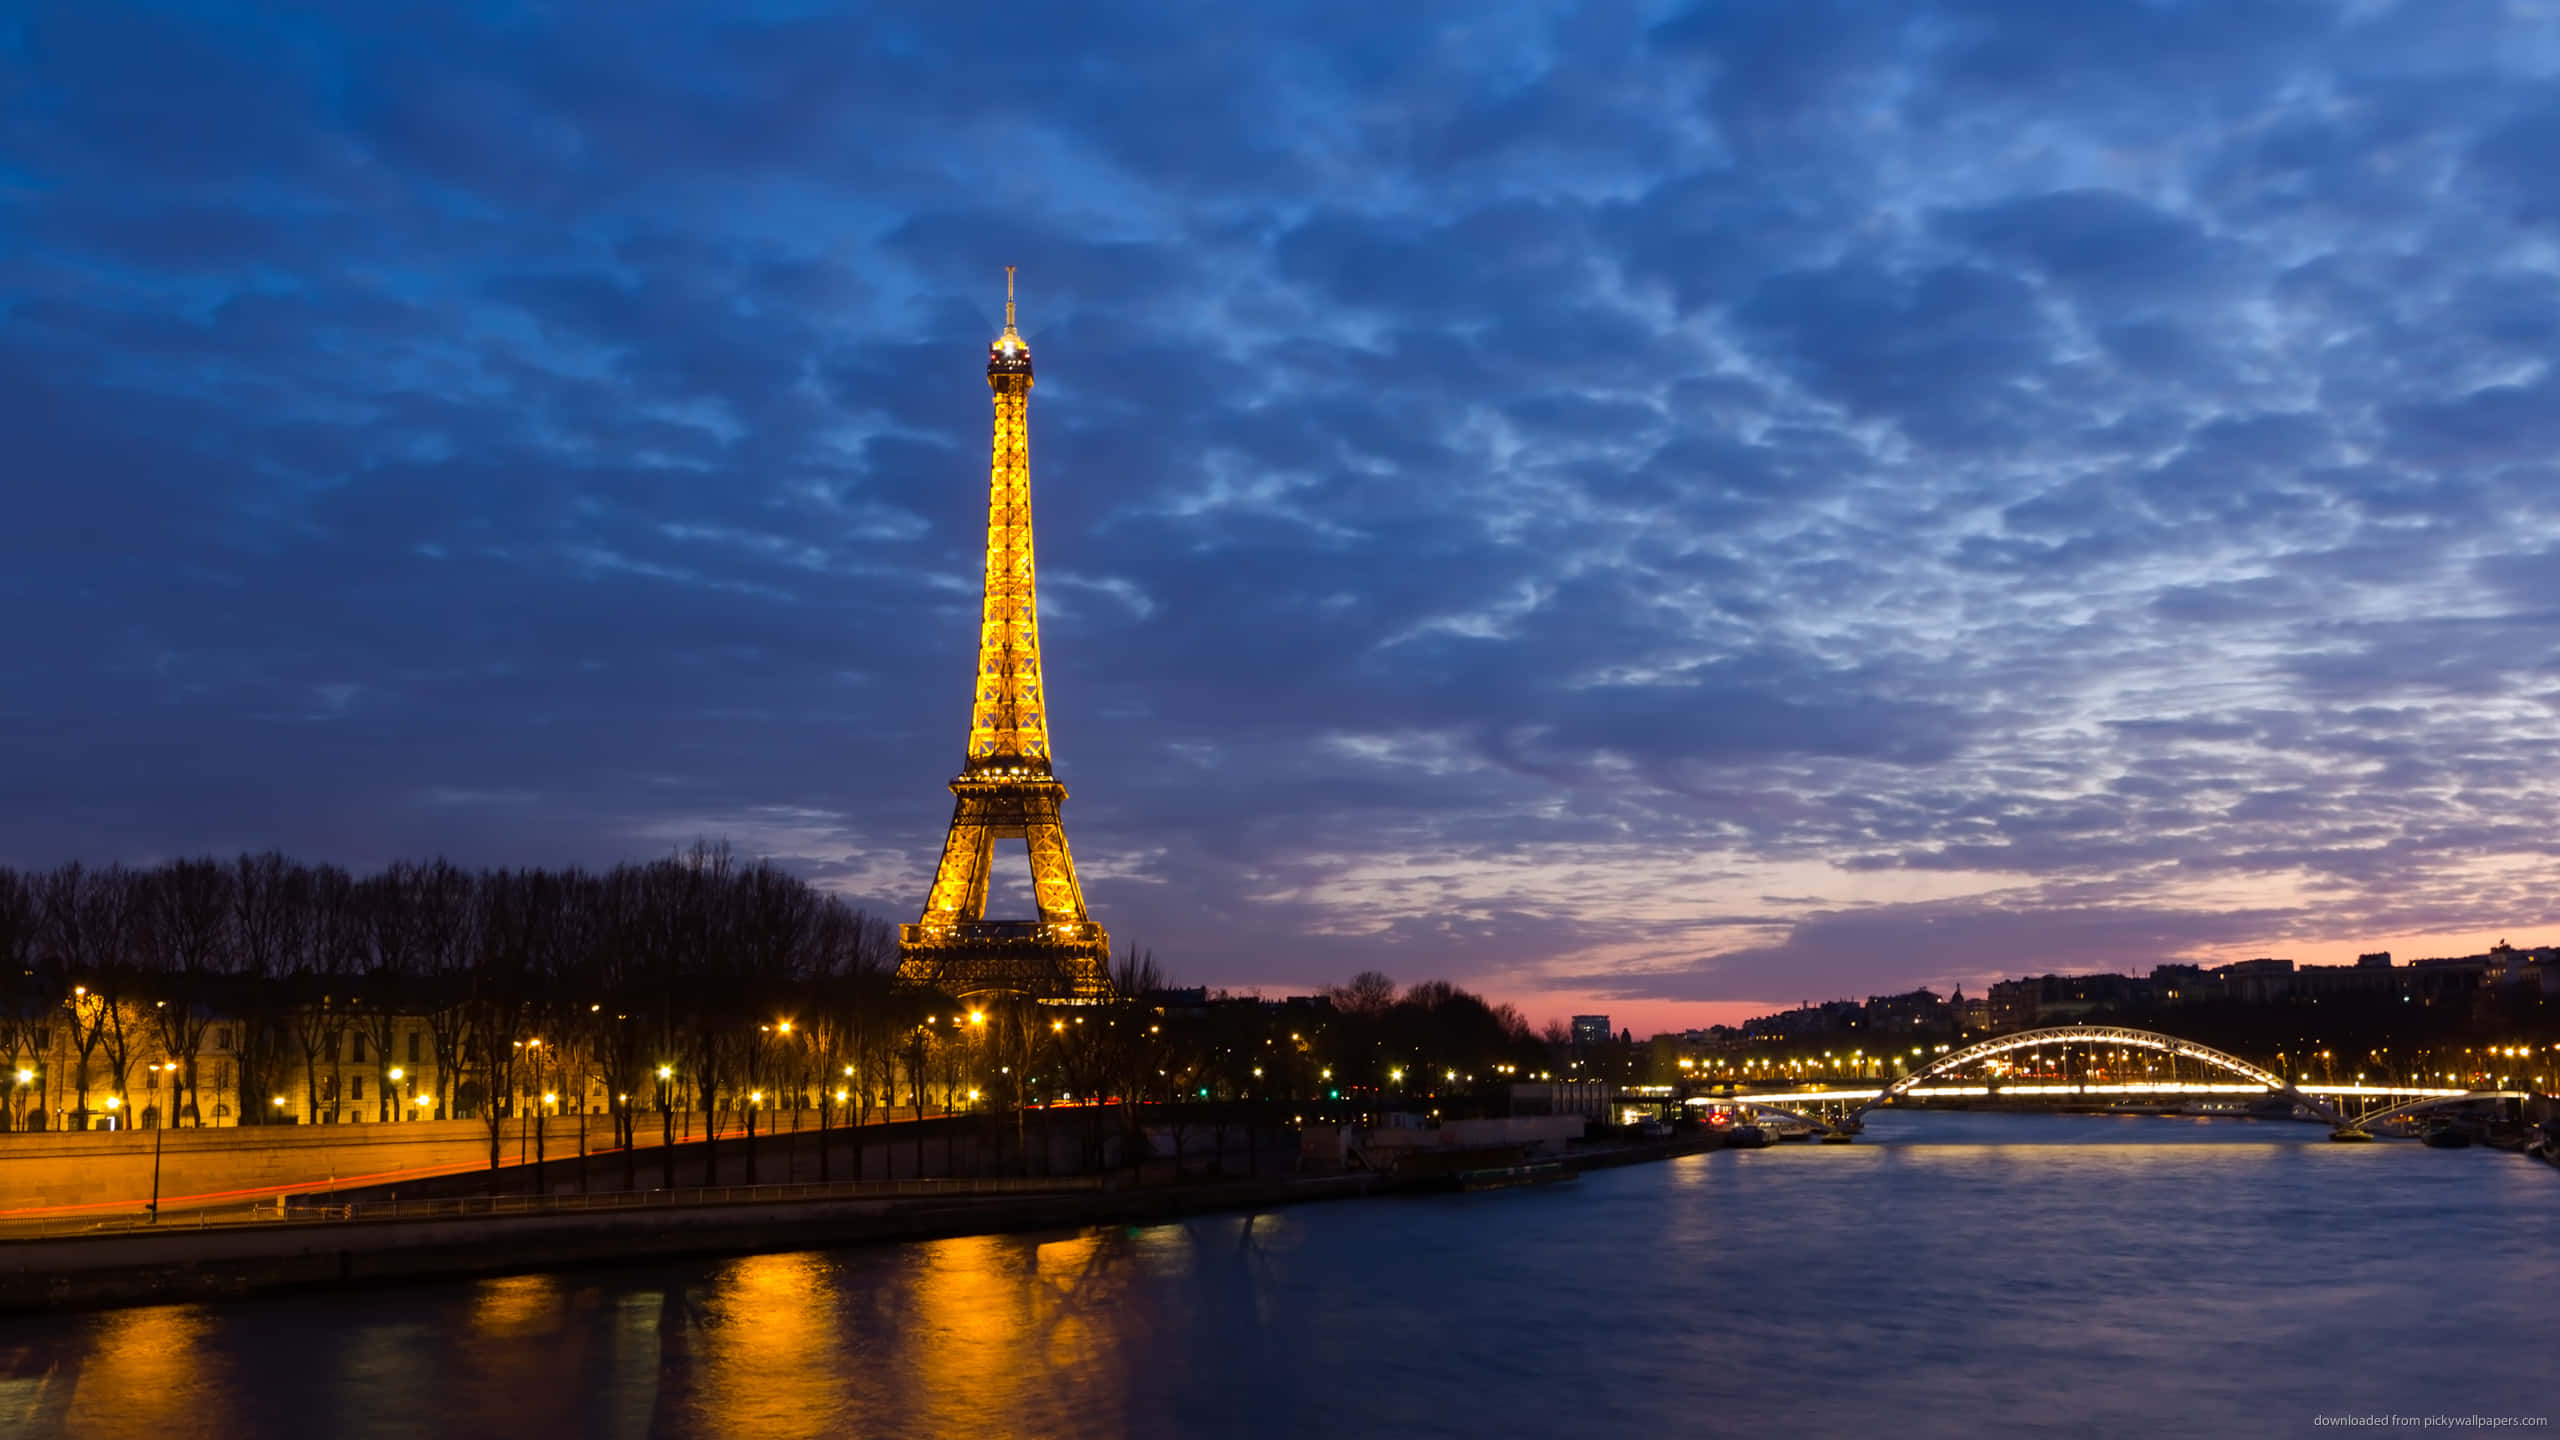 Illuminated Eiffel Tower in the City of Lights